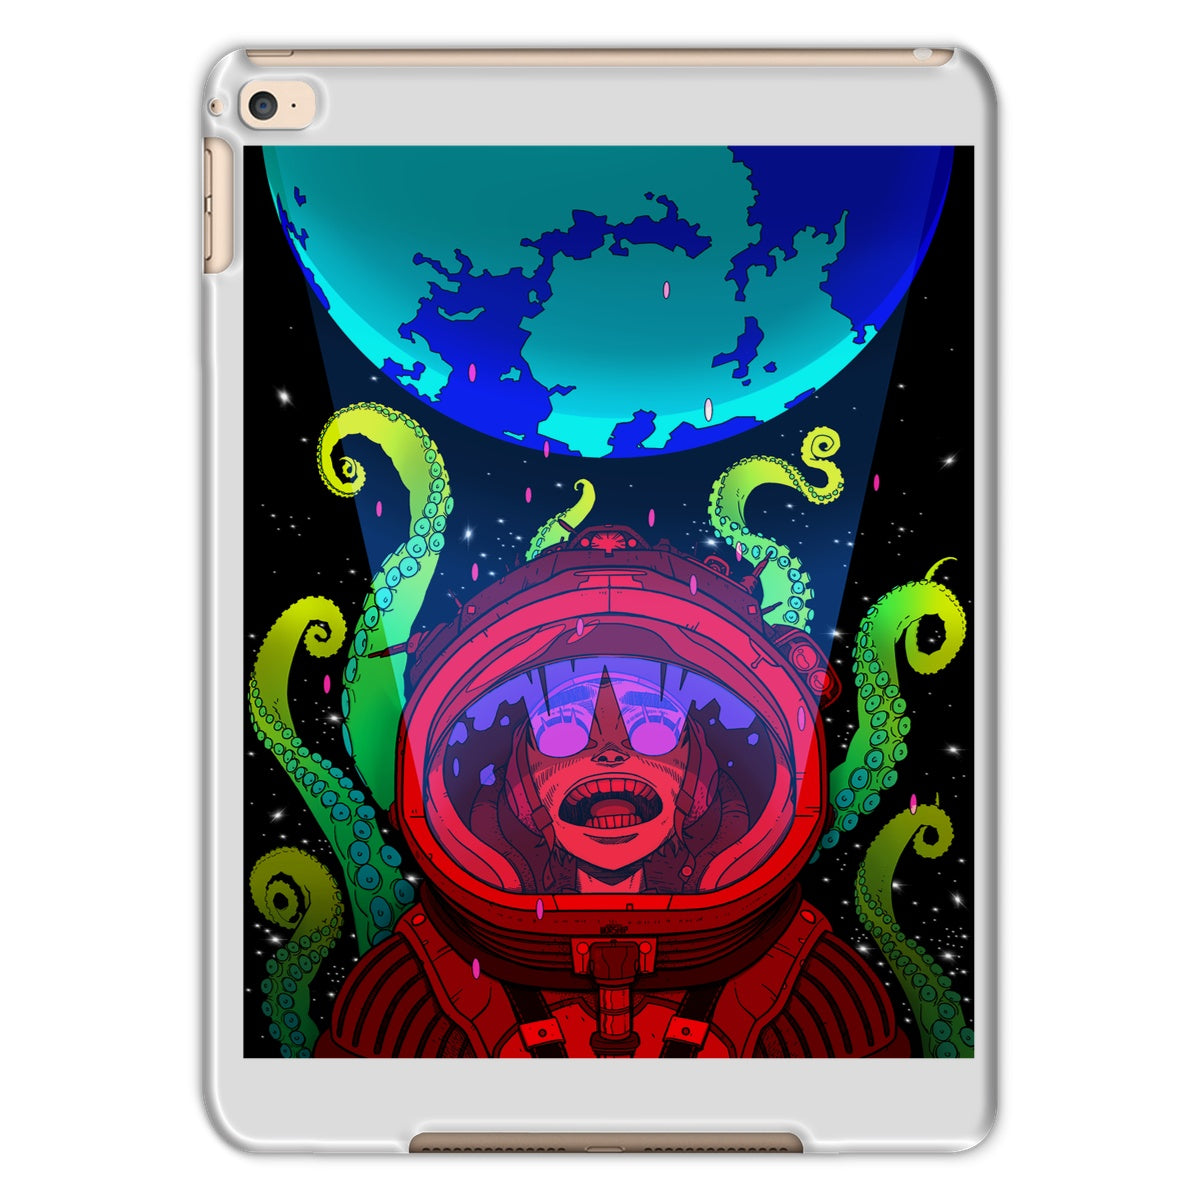 Unique and cool Gorillaz-style cthulhu Tablet Case illustration 